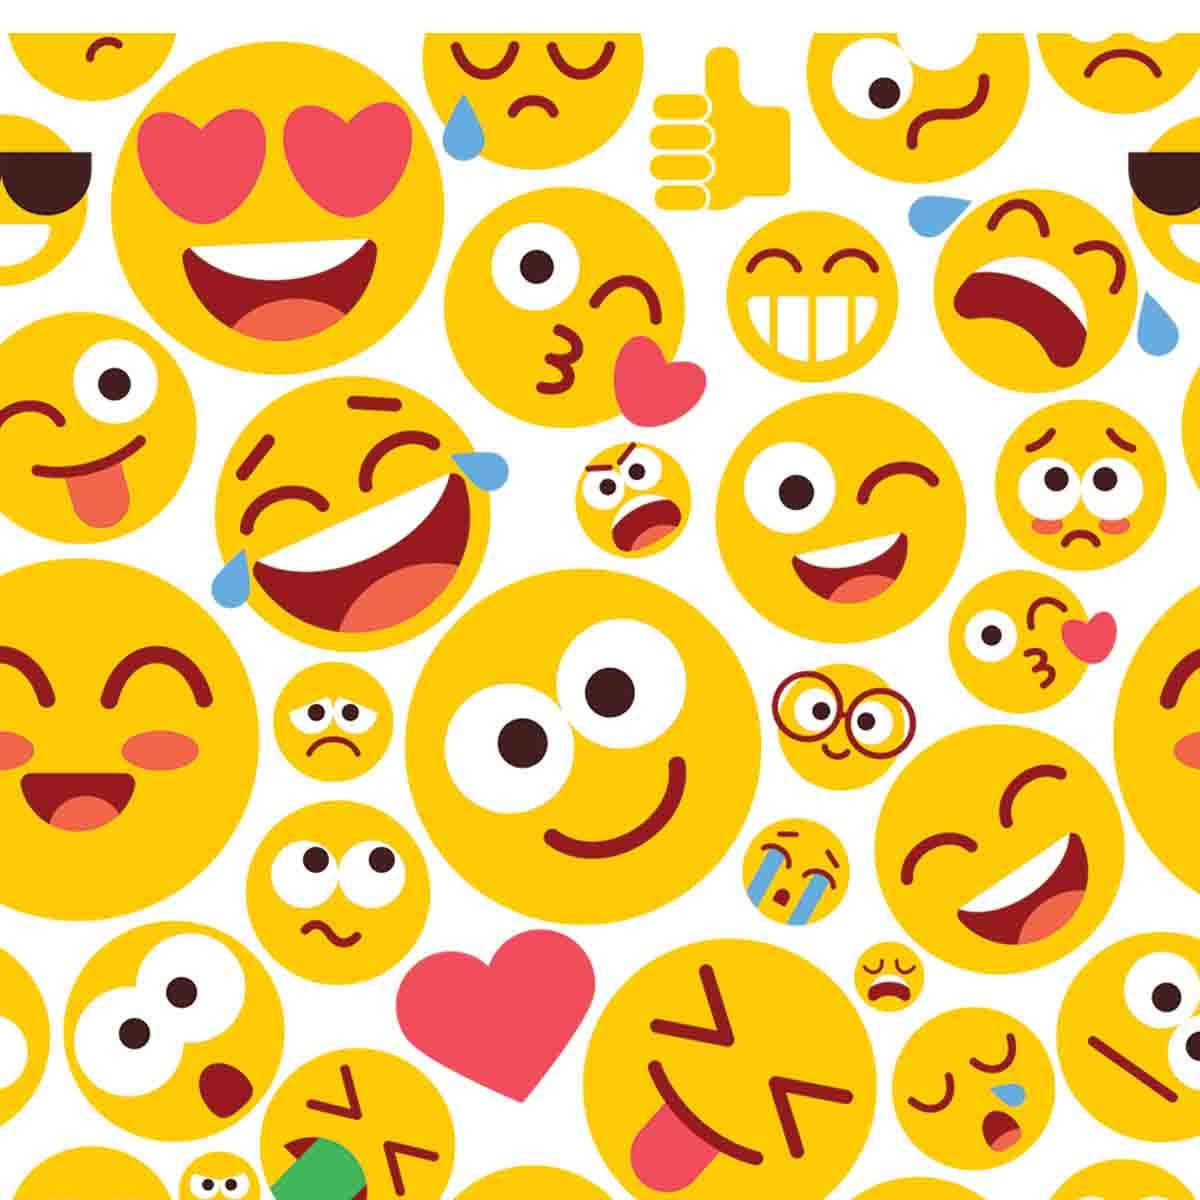 Emoji With Different Emotions On White Background Wallpaper Teen Girl Bedroom Mural